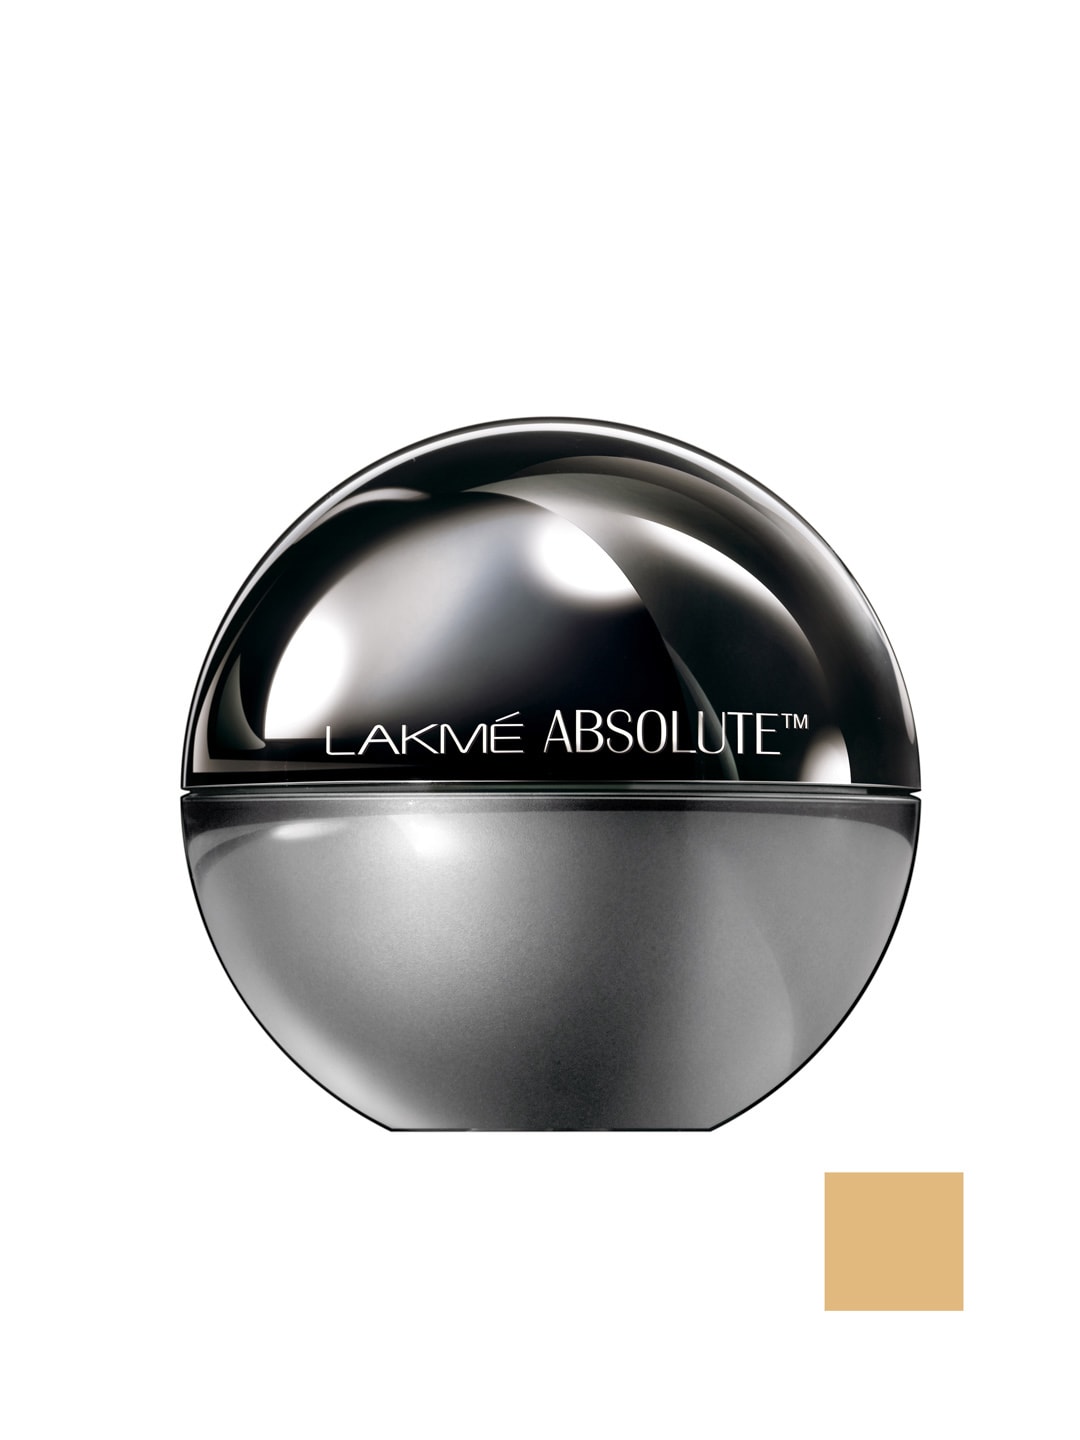 Lakme Absolute Mattreal Skin Natural Mousse - Golden Medium 25g Price in India